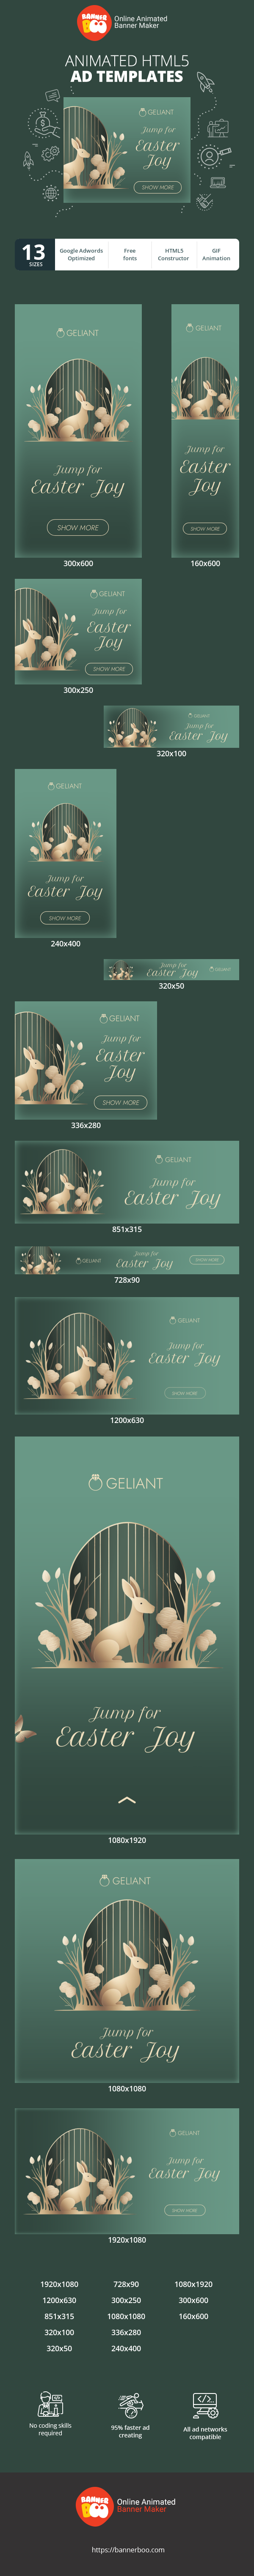 Banner ad template — Jump For Easter Joy — Easter